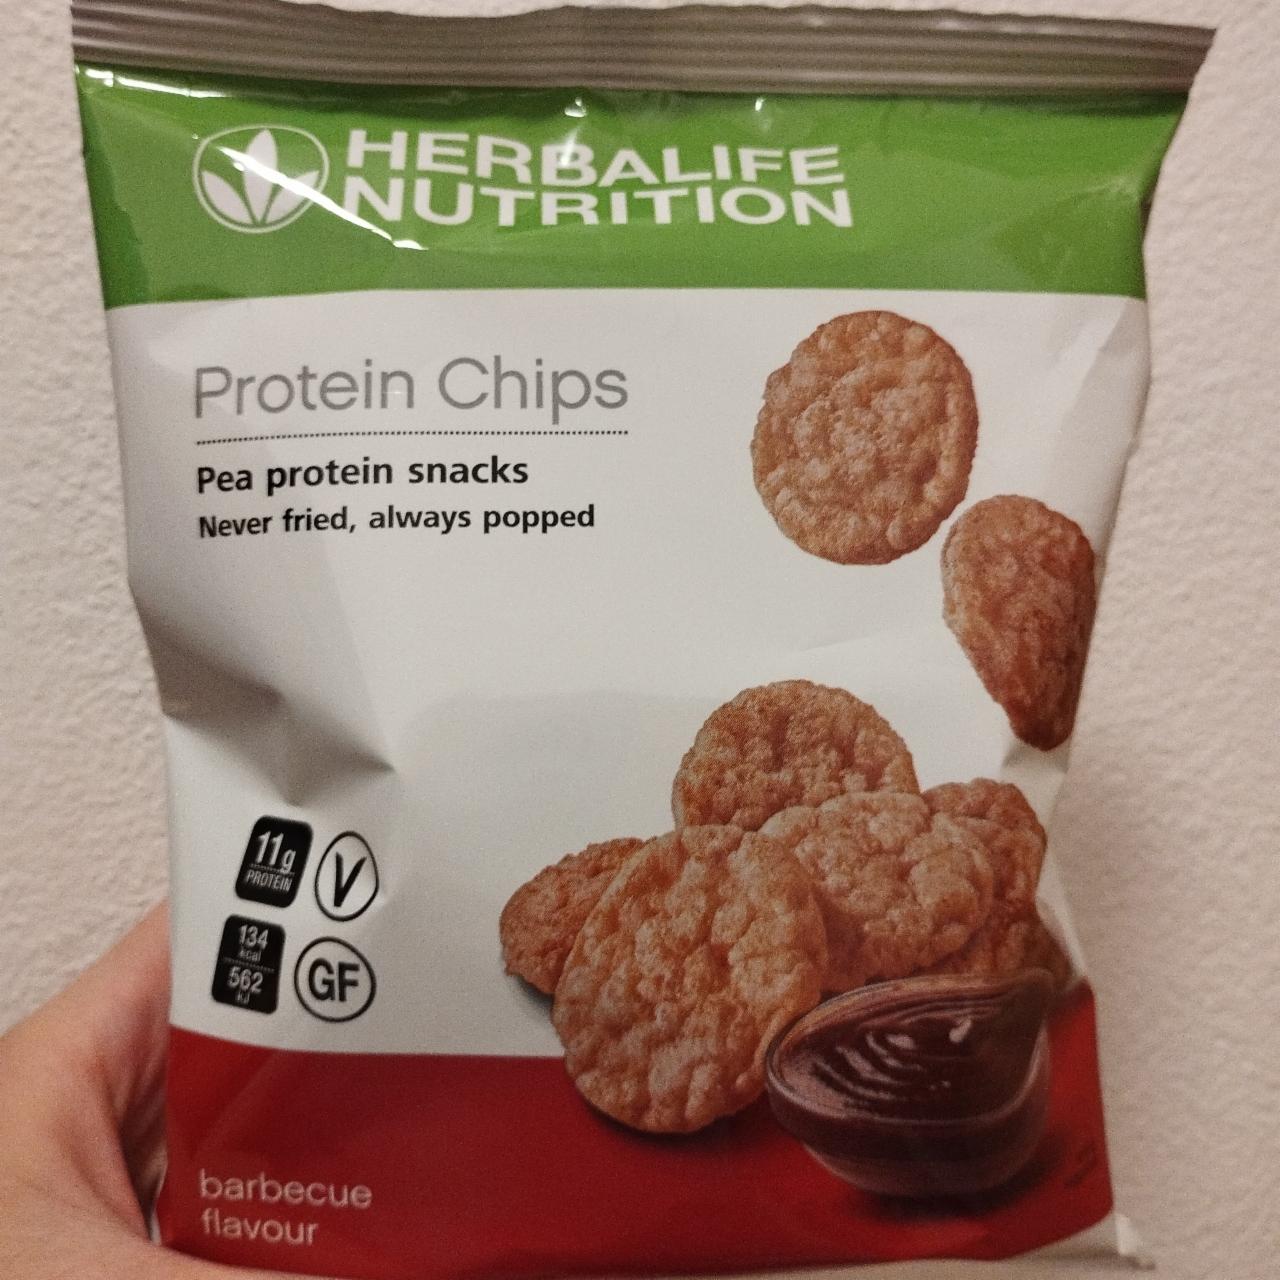 Fotografie - Protein Chips Pea protein snacks Barbecue flavour Herbalife Nutrition